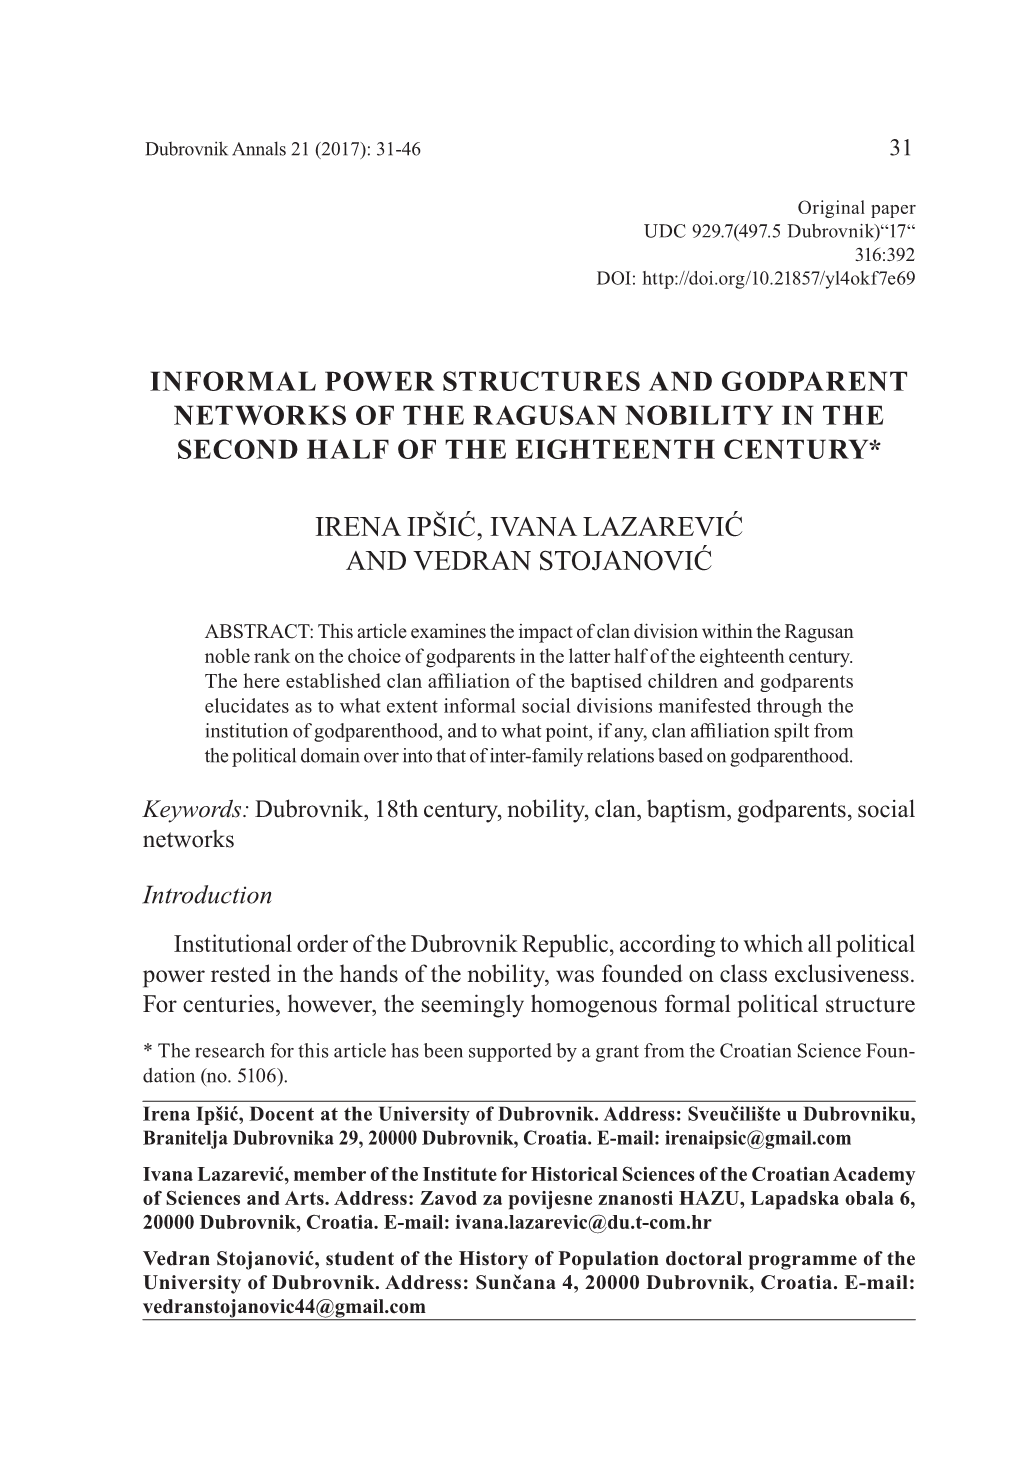 Informal Power Structures and Godparent Networks of the Ragusan Nobility in the Second Half of the Eighteenth Century*